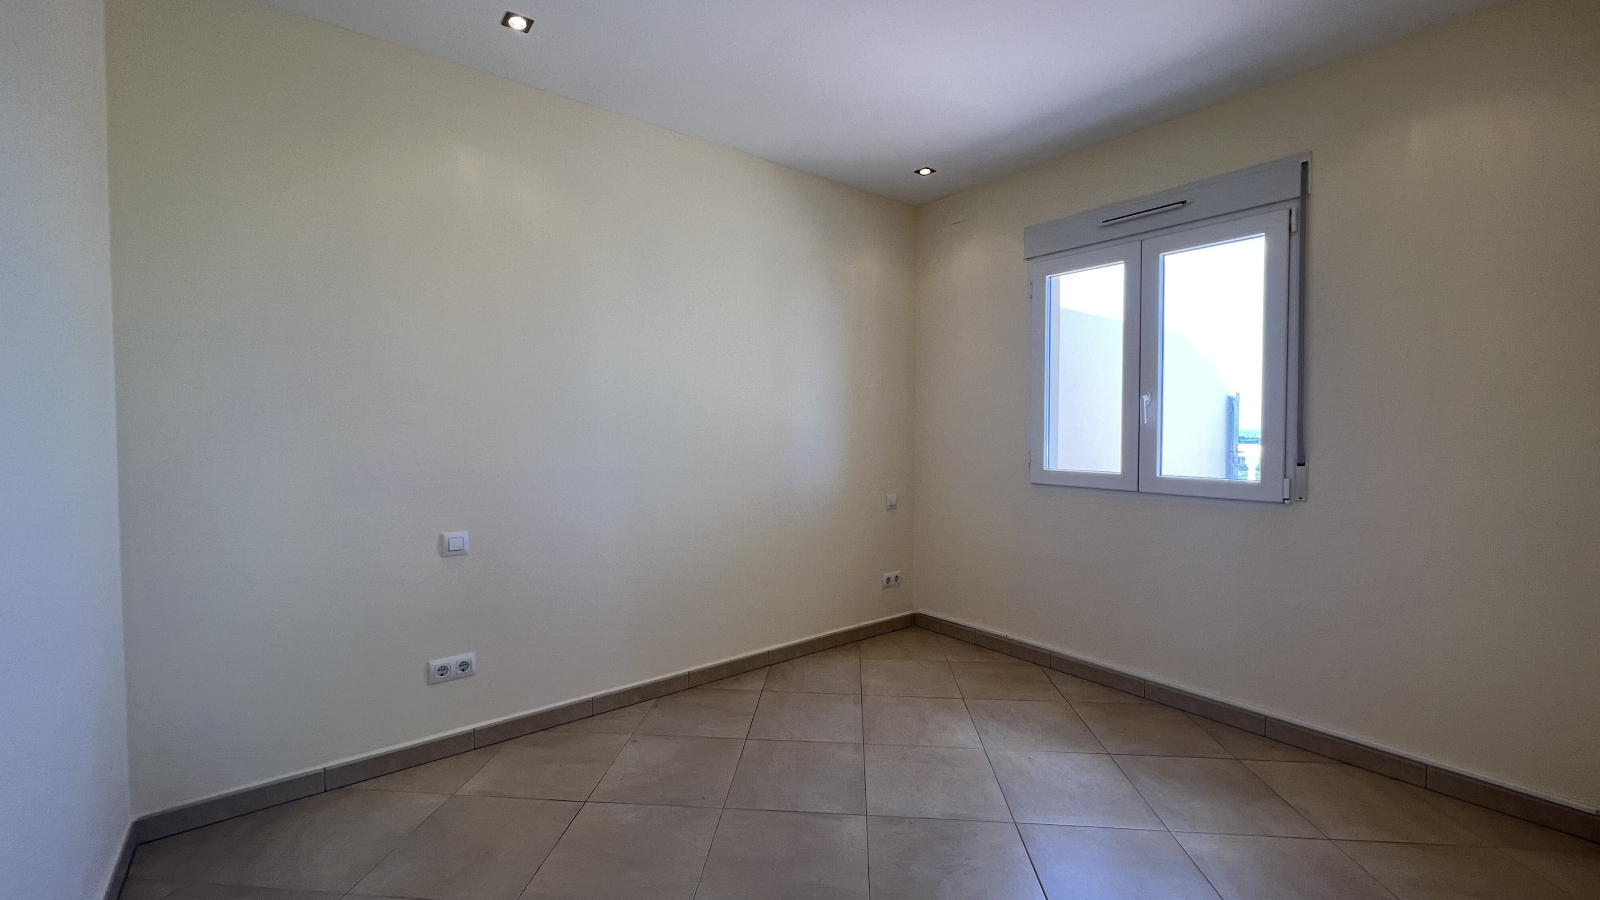 Close to the city, new building with 2 bedrooms and community pool in wonderful panoramic location in Denia.